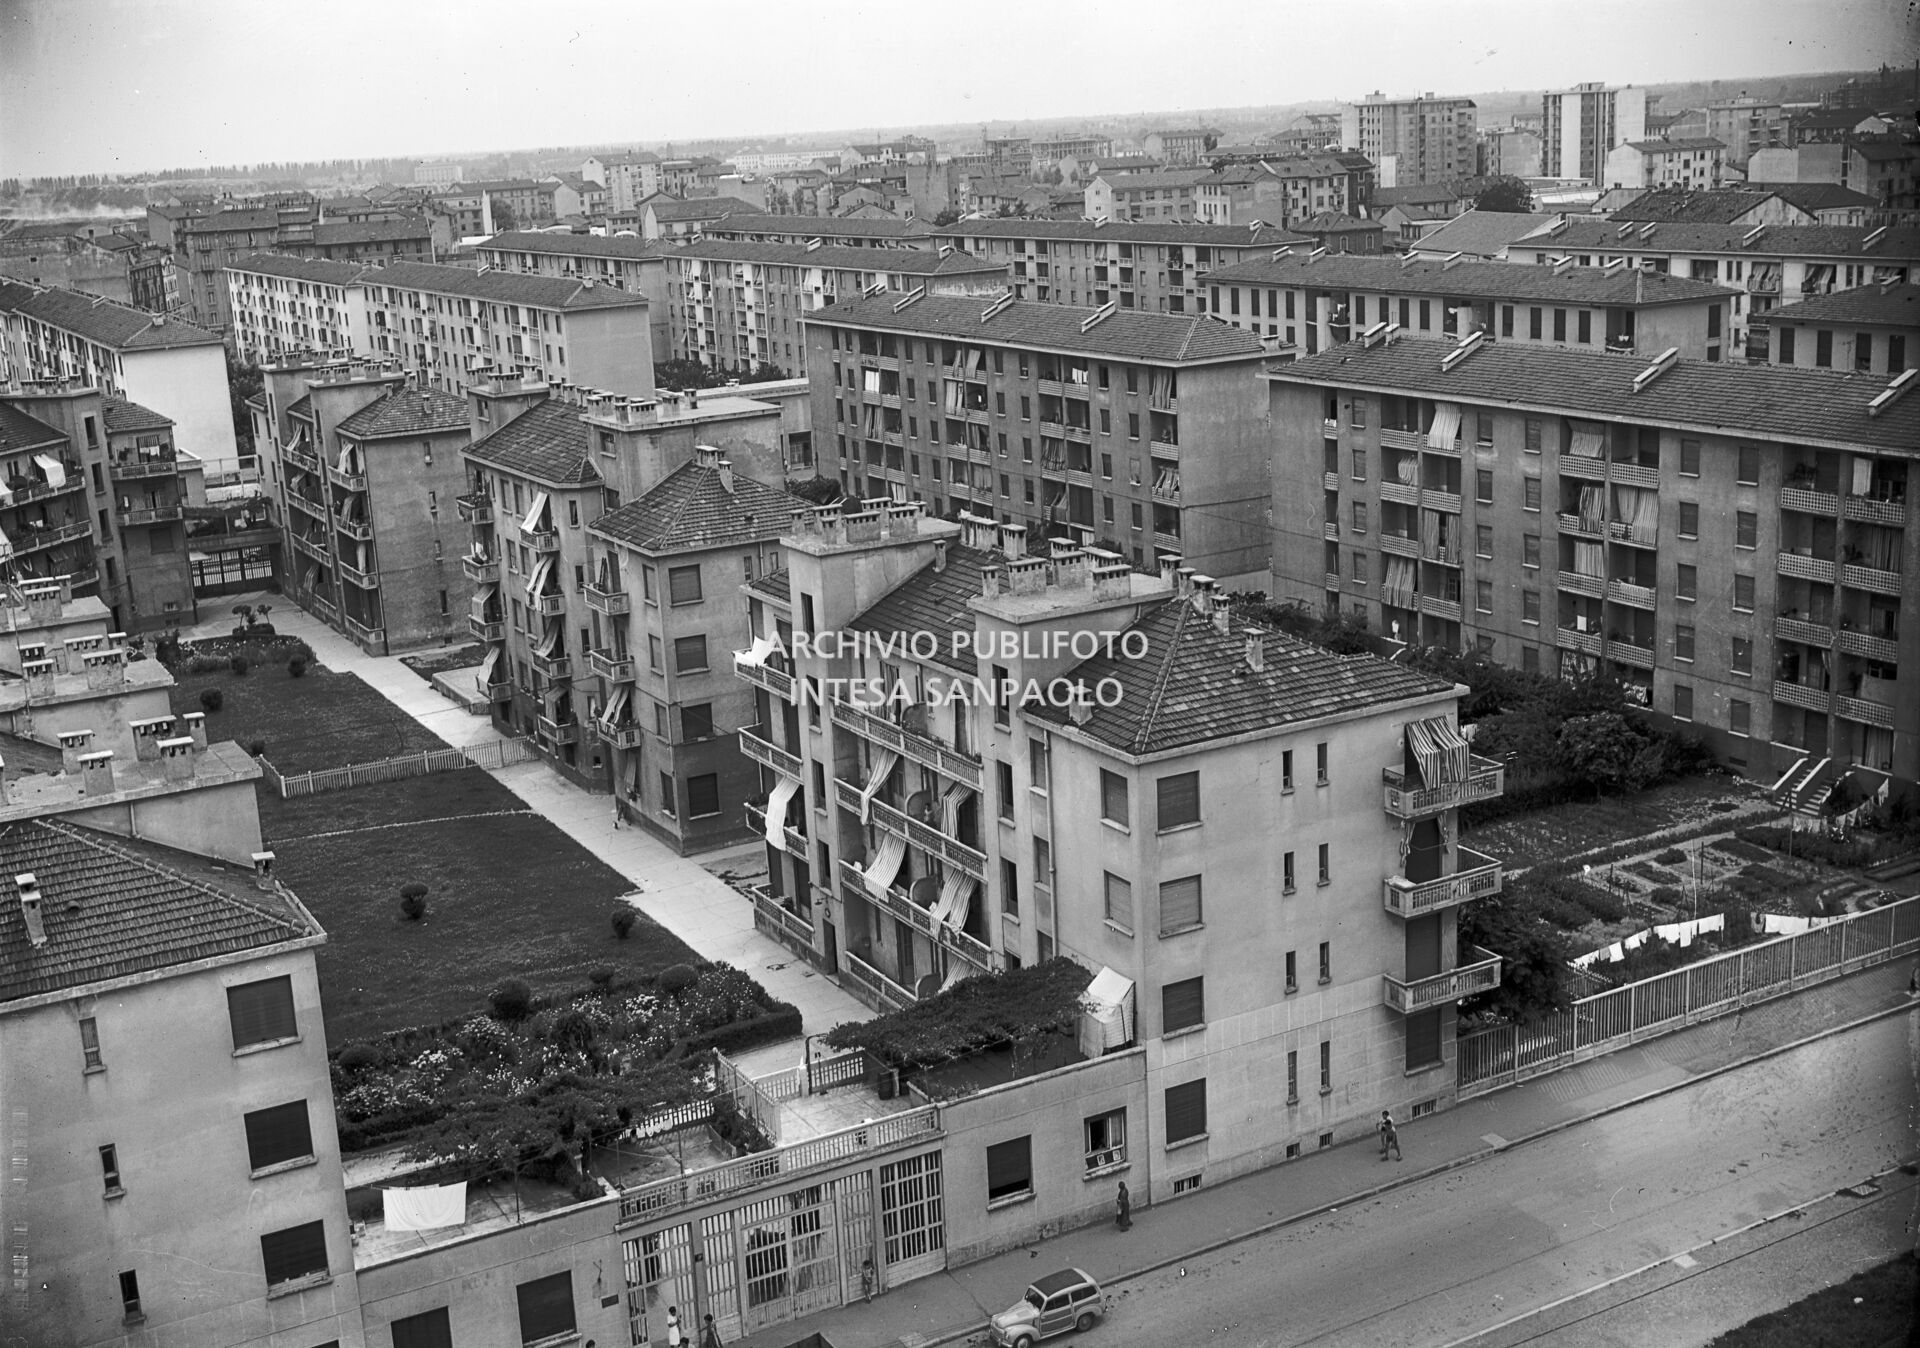 High view of an area of public housing in Milan